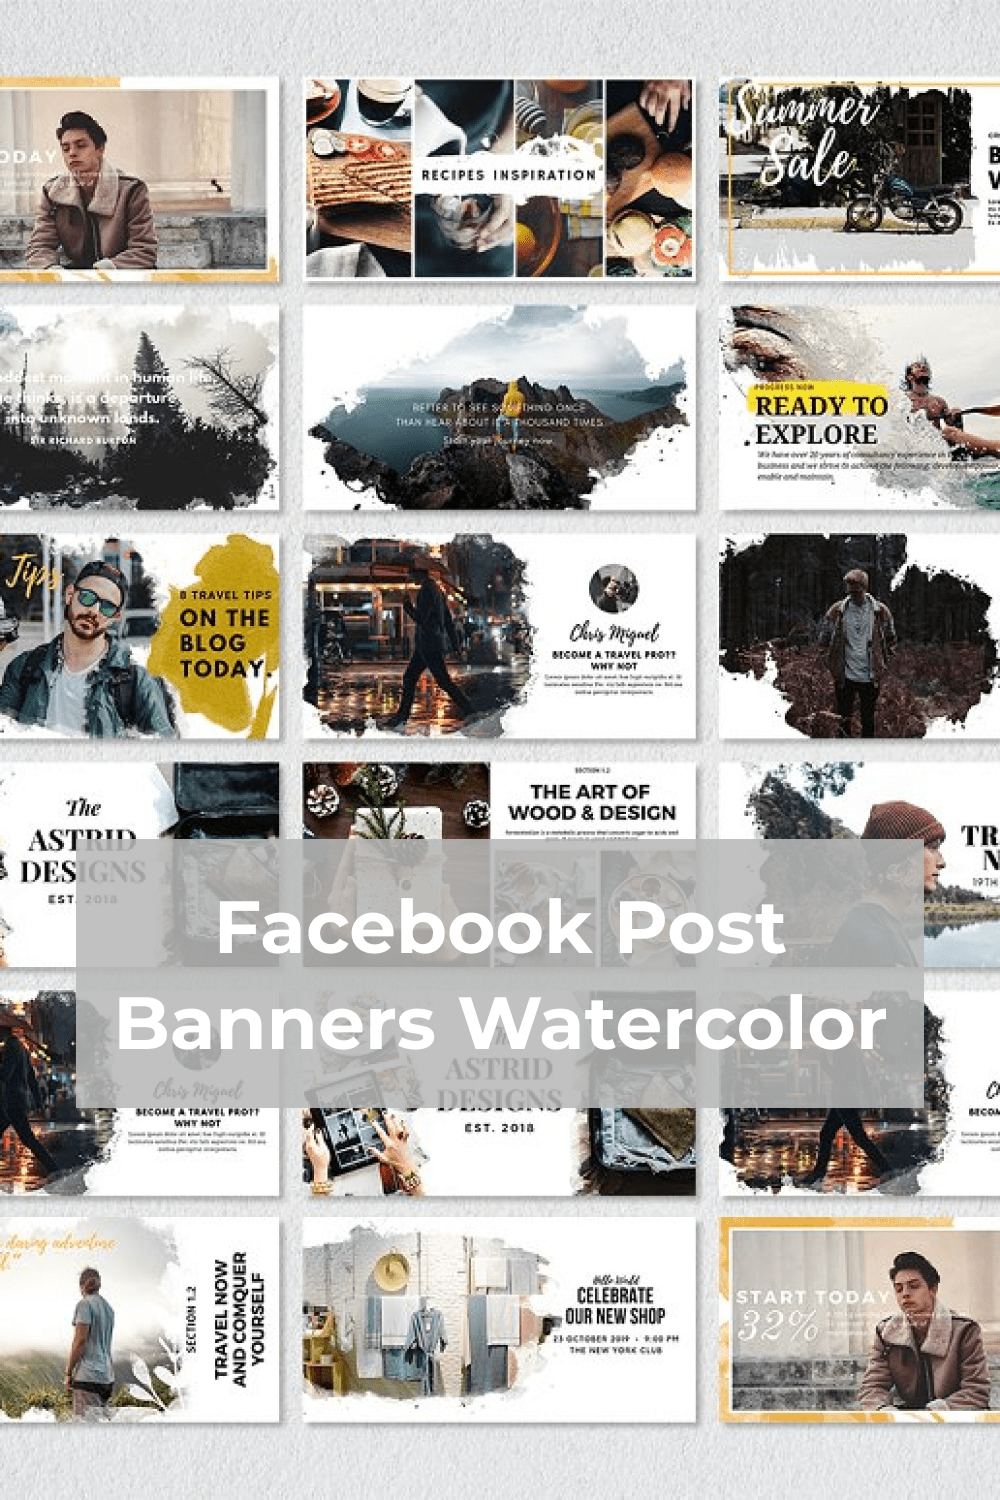 Creative facebook covers in watercolor style.